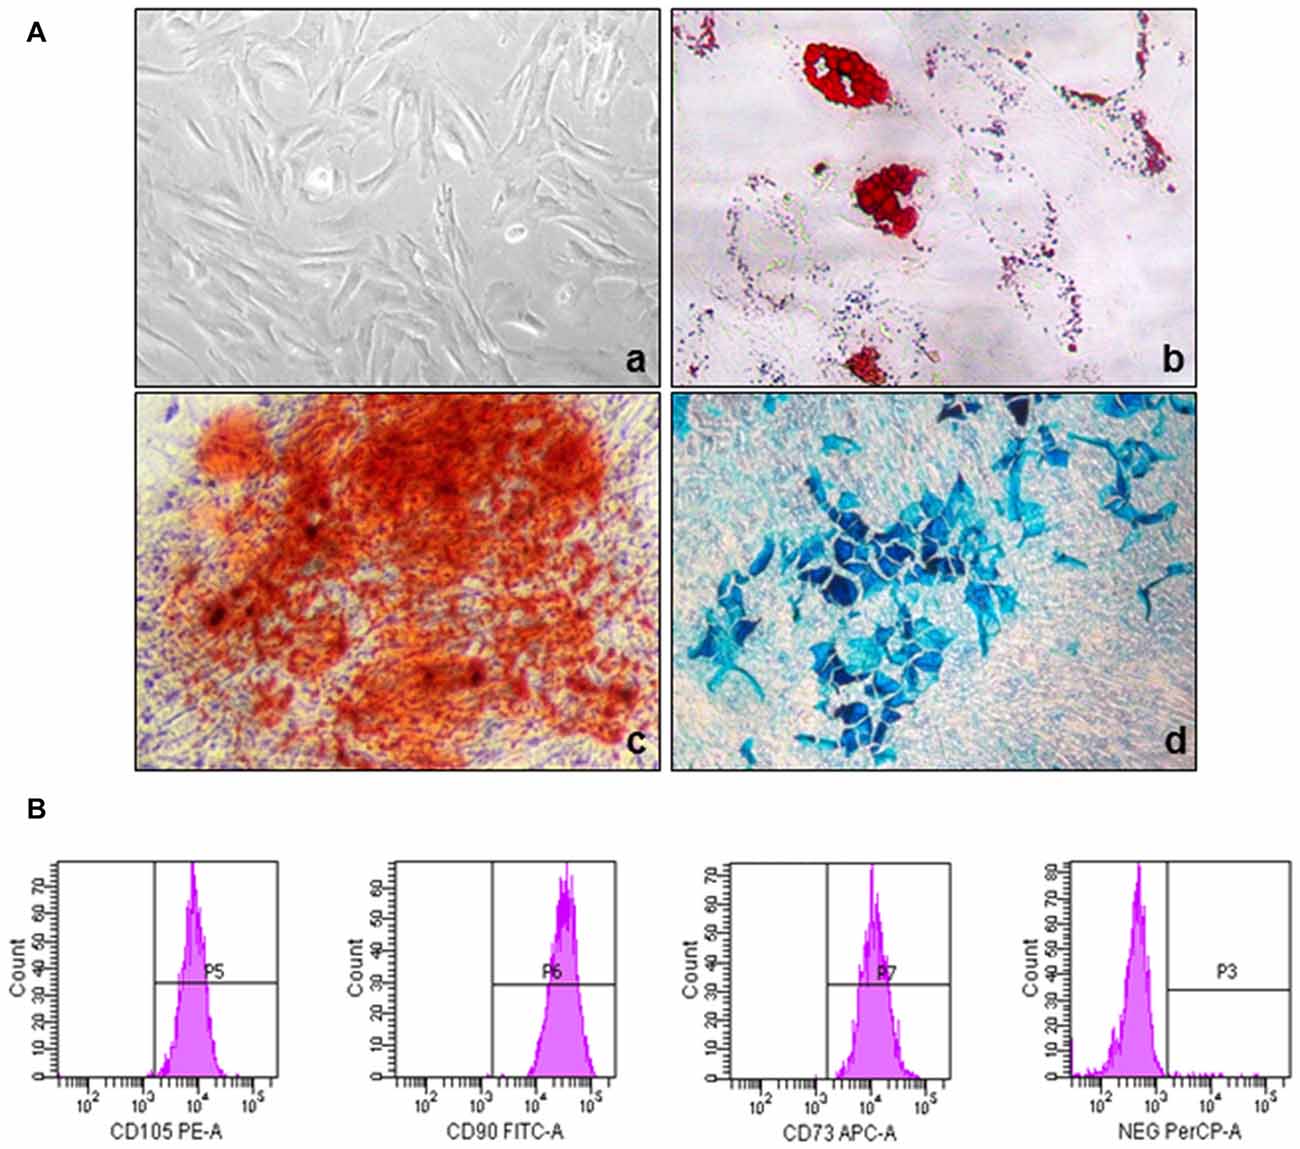 Phenotypic and functional characterization of MSCs.